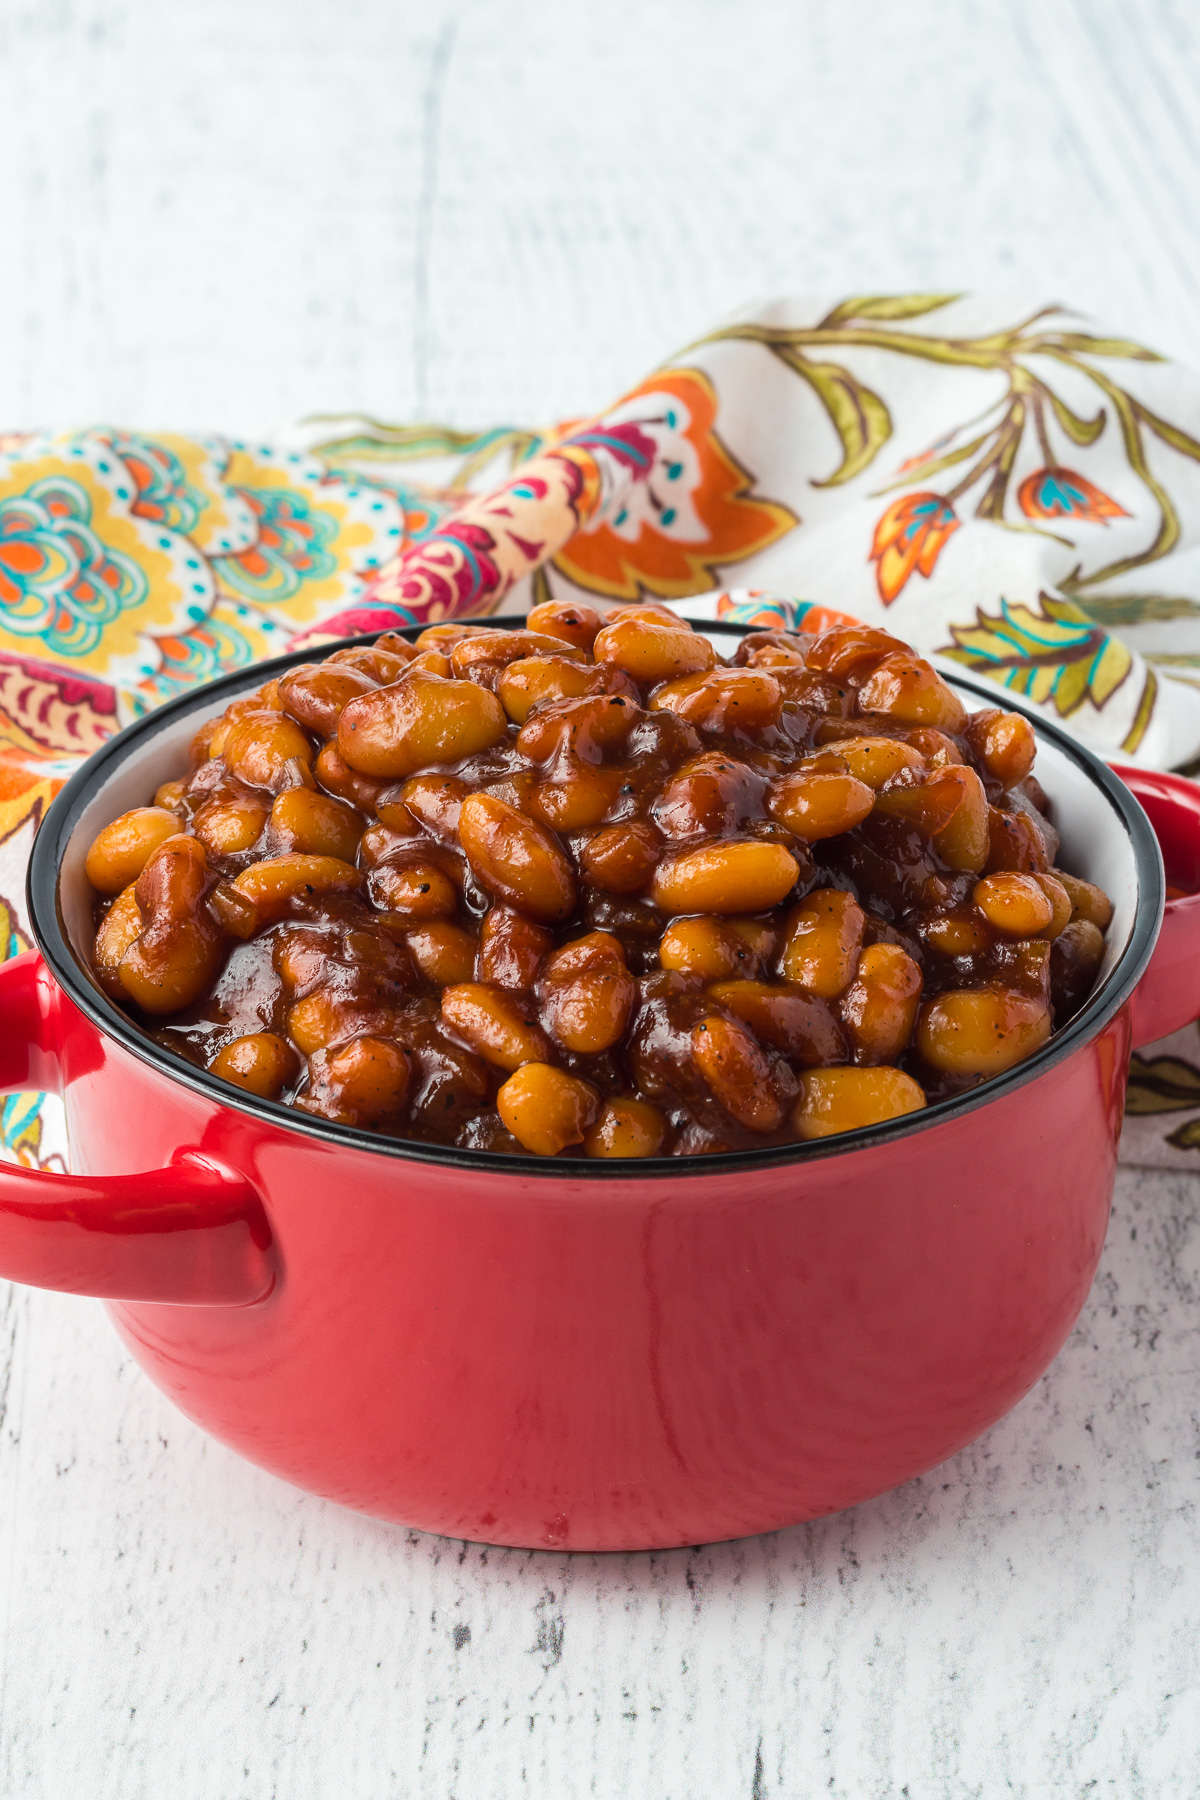 Sweet and savory Baked Beans are the perfect side dish for summer potlucks, backyard BBQs, and even a great family dinner when camping! Made with Great Northern Beans, molasses, ketchup, BBQ sauce, brown sugar and more, this easy bean recipe is bursting with flavor in every bite. via @foodhussy